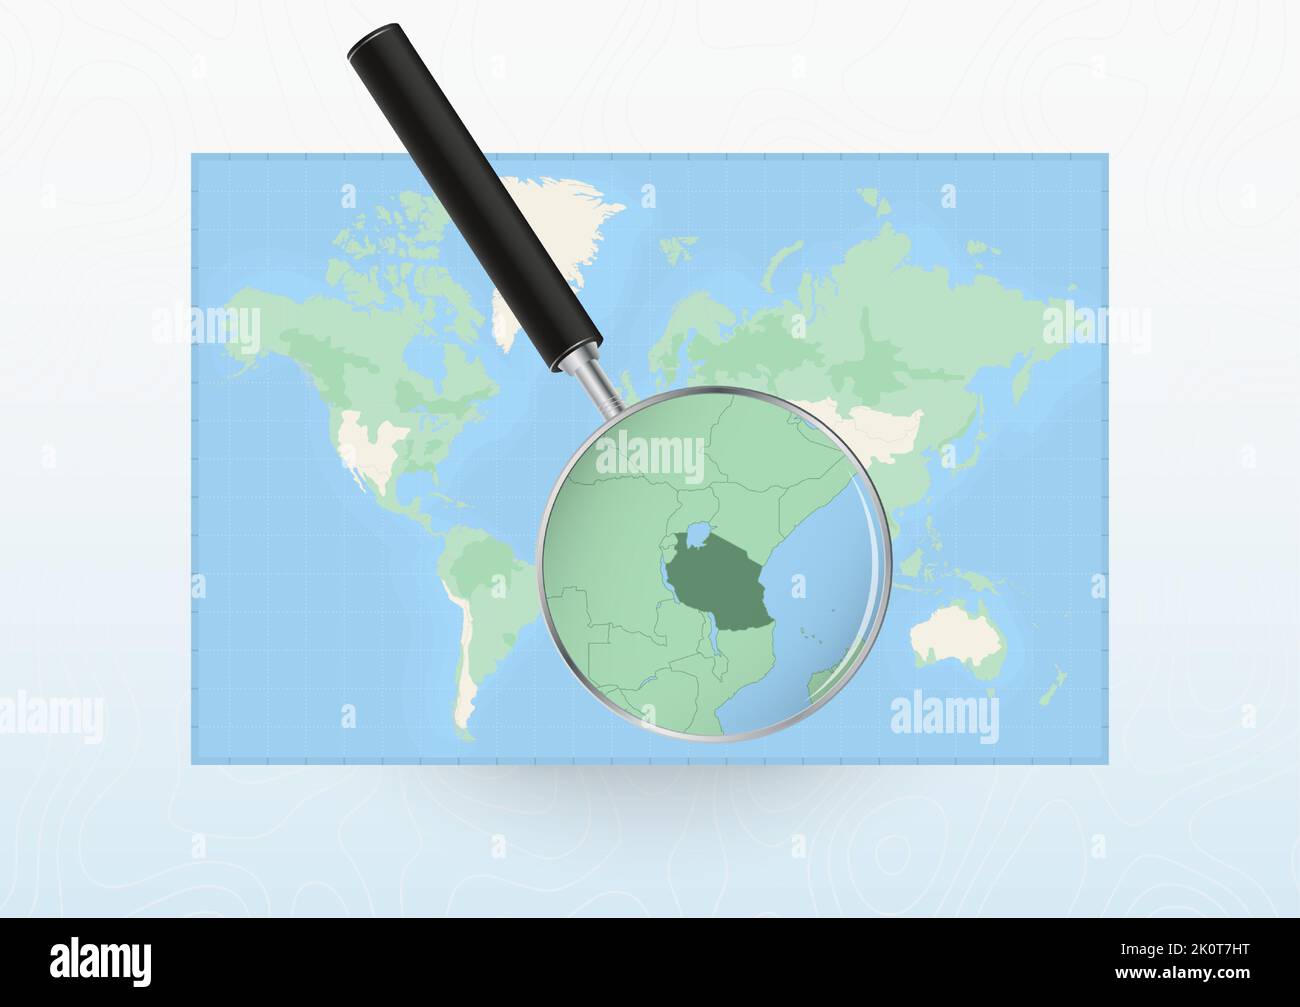 Map of the World with a magnifying glass aimed at Tanzania, searching Tanzania with loupe. Vector map. Stock Vector